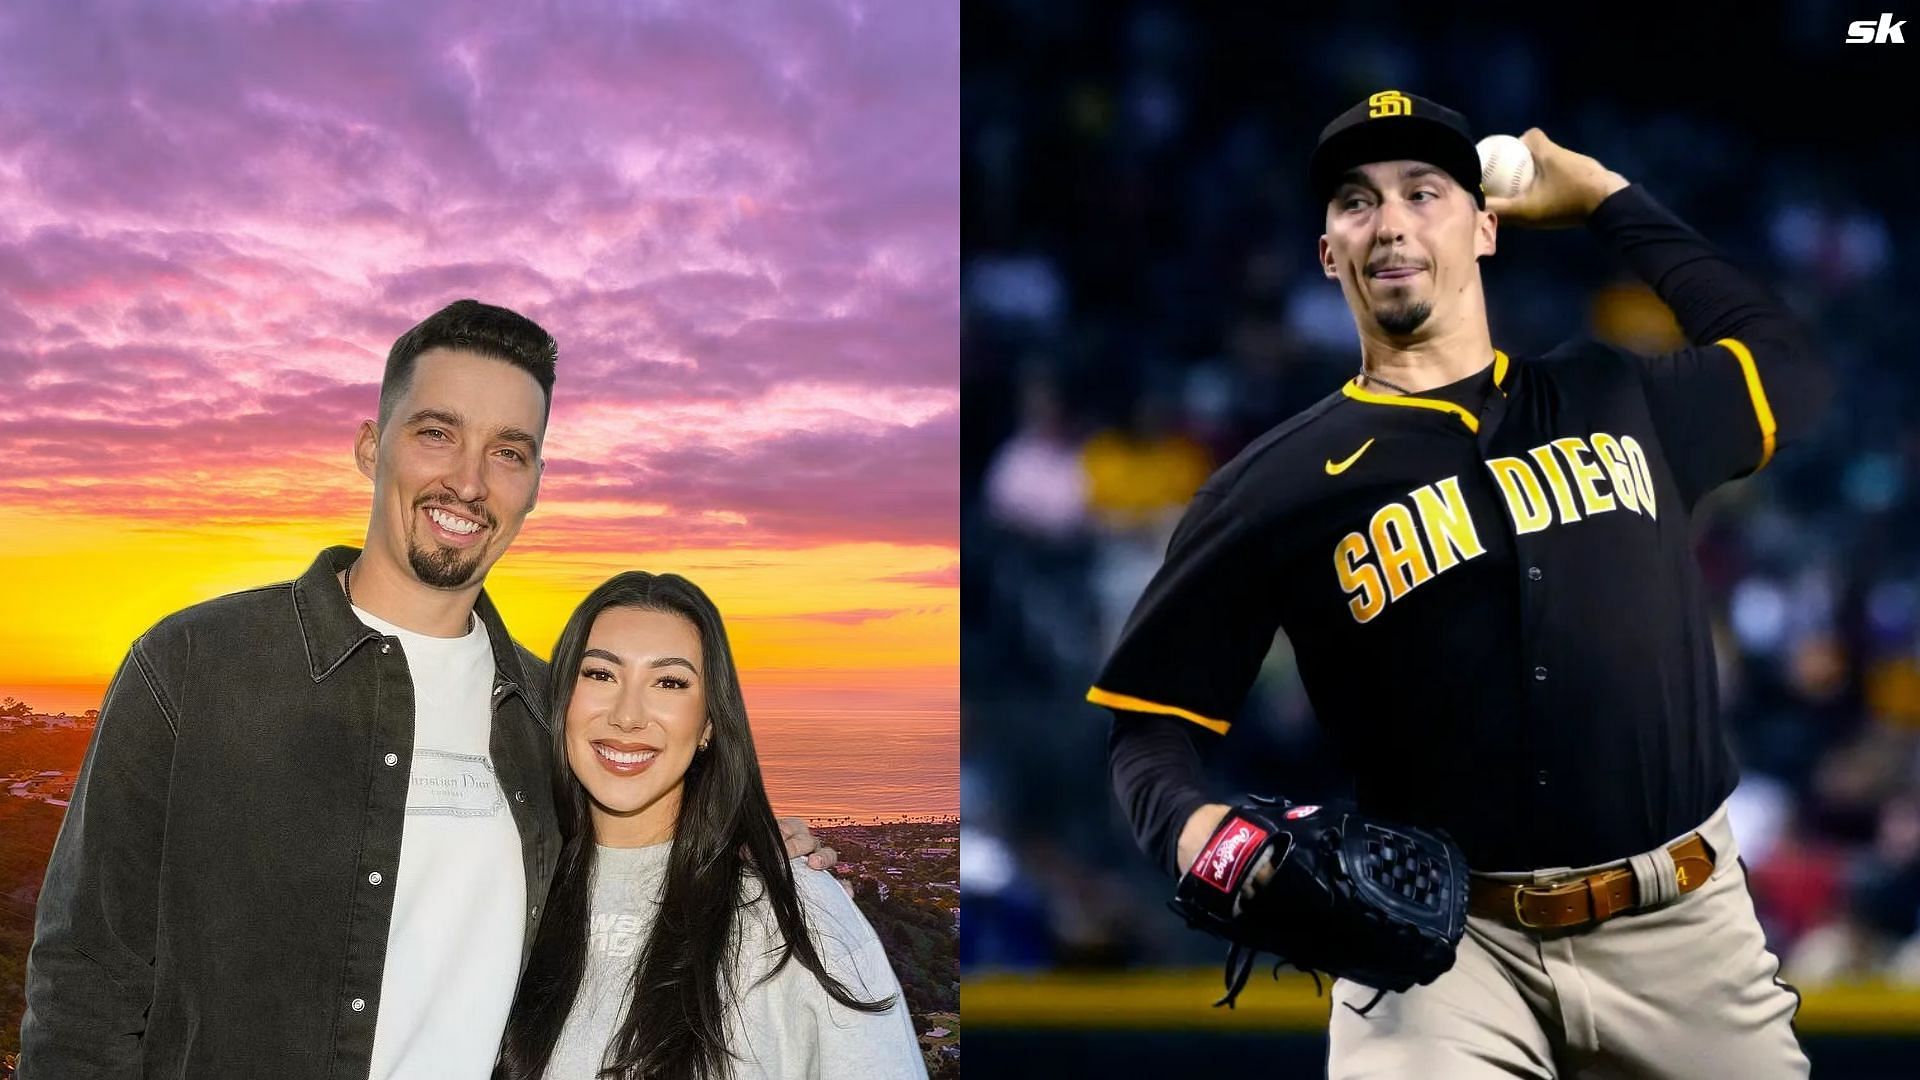 Blake Snell enjoys his offseason in Tuscany with gf Haeley Mar